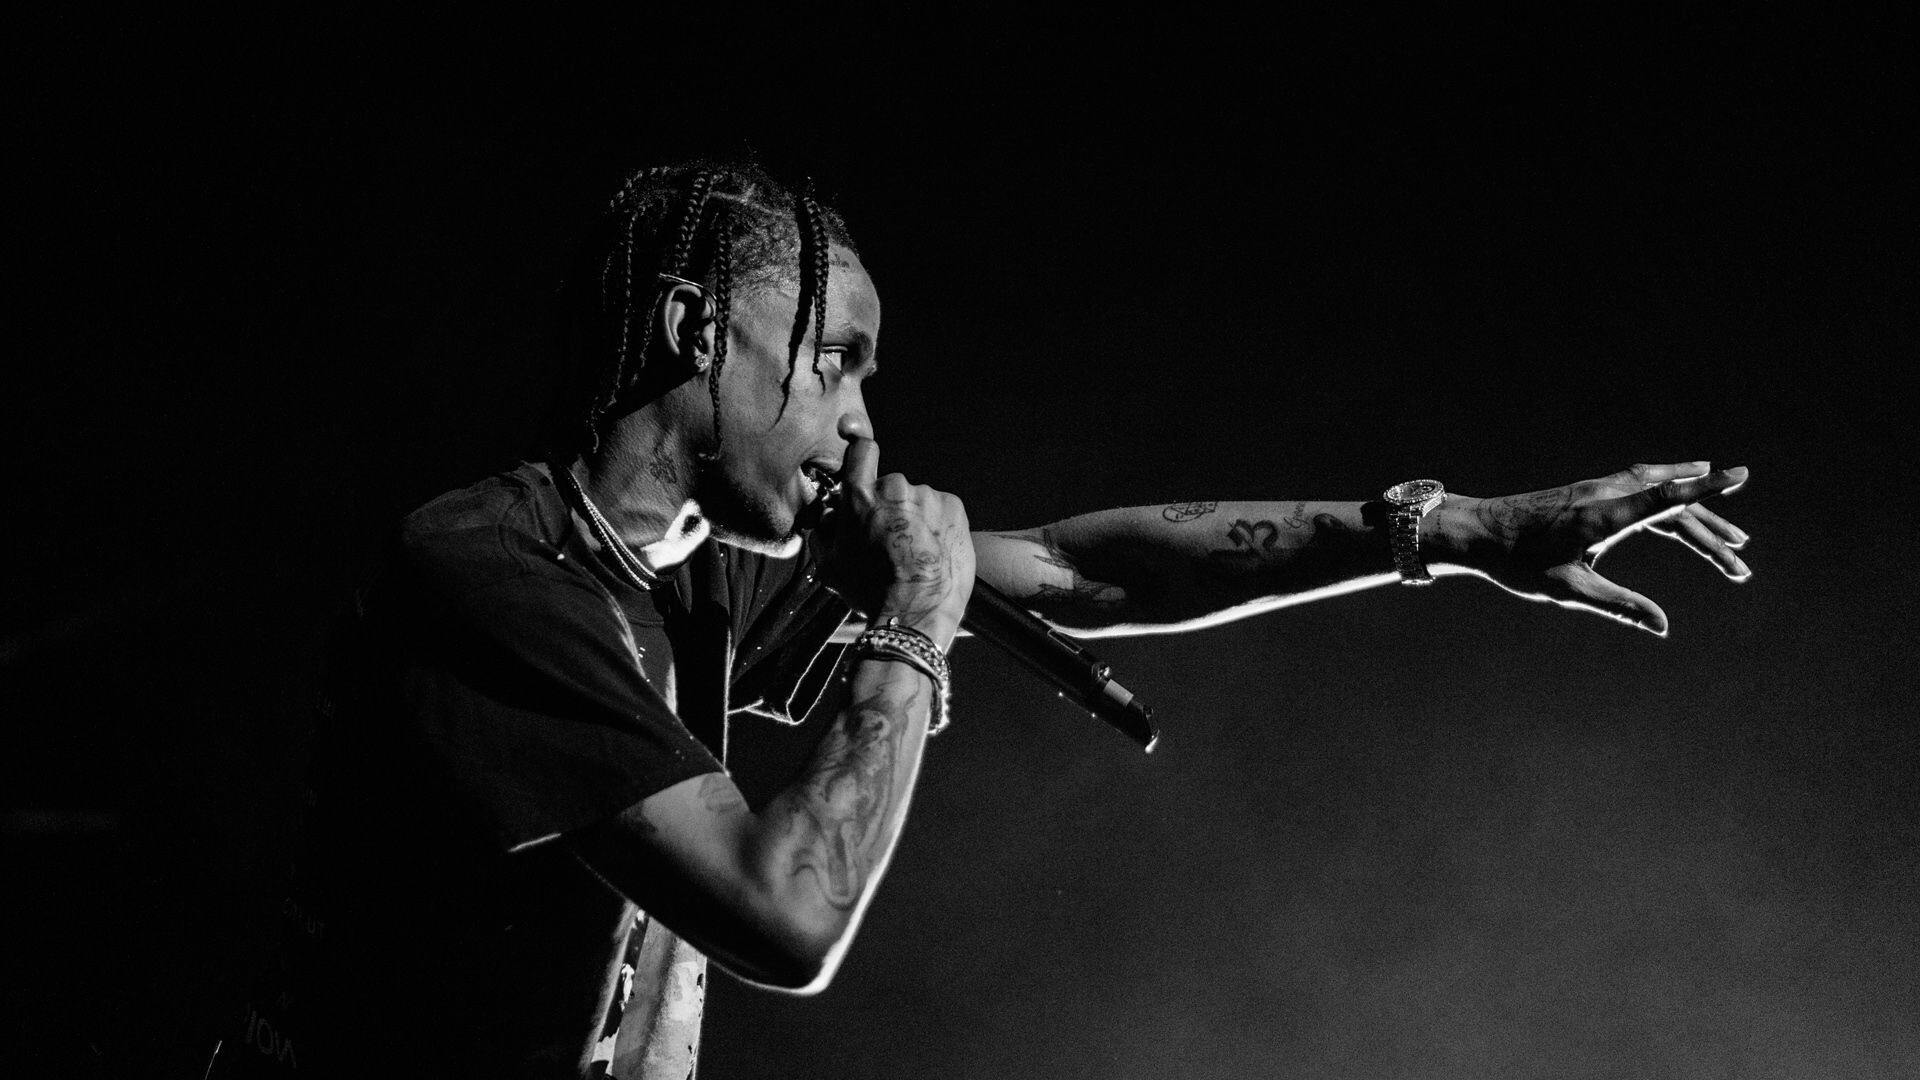 Travis Scott: Rapper, Known for highly publicized relationship with American media personality Kylie Jenner, Monochrome. 1920x1080 Full HD Background.